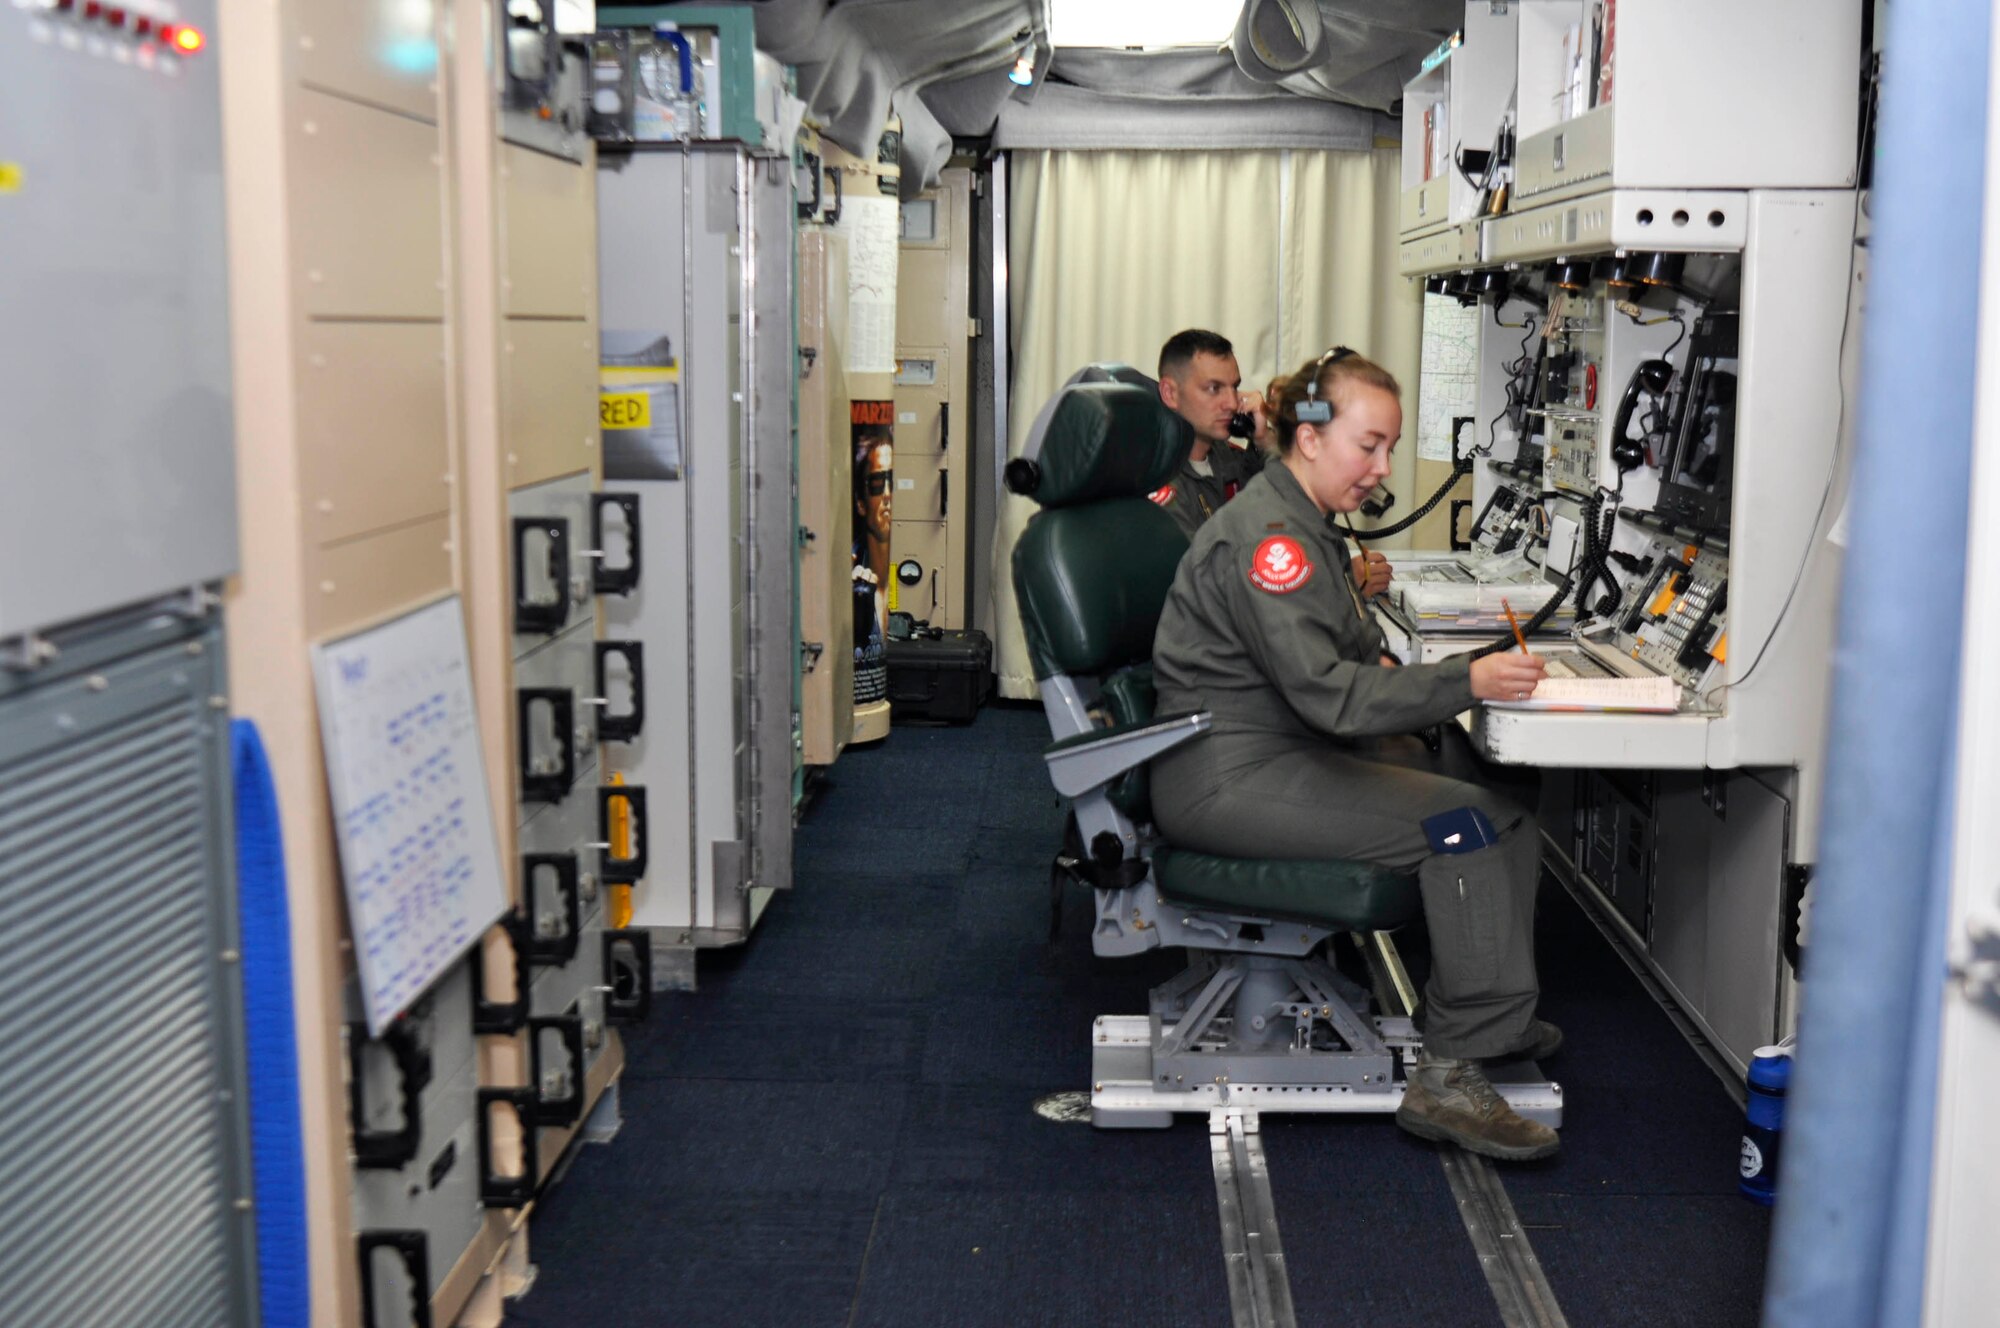 Missileers with the 320th Missile Squadron prepare for a Simulated Electronic Launch-Minuteman test inside a launch control center at a missile alert facility in the 90th Missile Wing missile complex, Aug. 21, 2018. Accomplishing the SELM validates these claims and increases the deterrent capability of the Minuteman III ICBM weapon system. (U.S. Air Force photo by Senior Airman Breanna Carter)